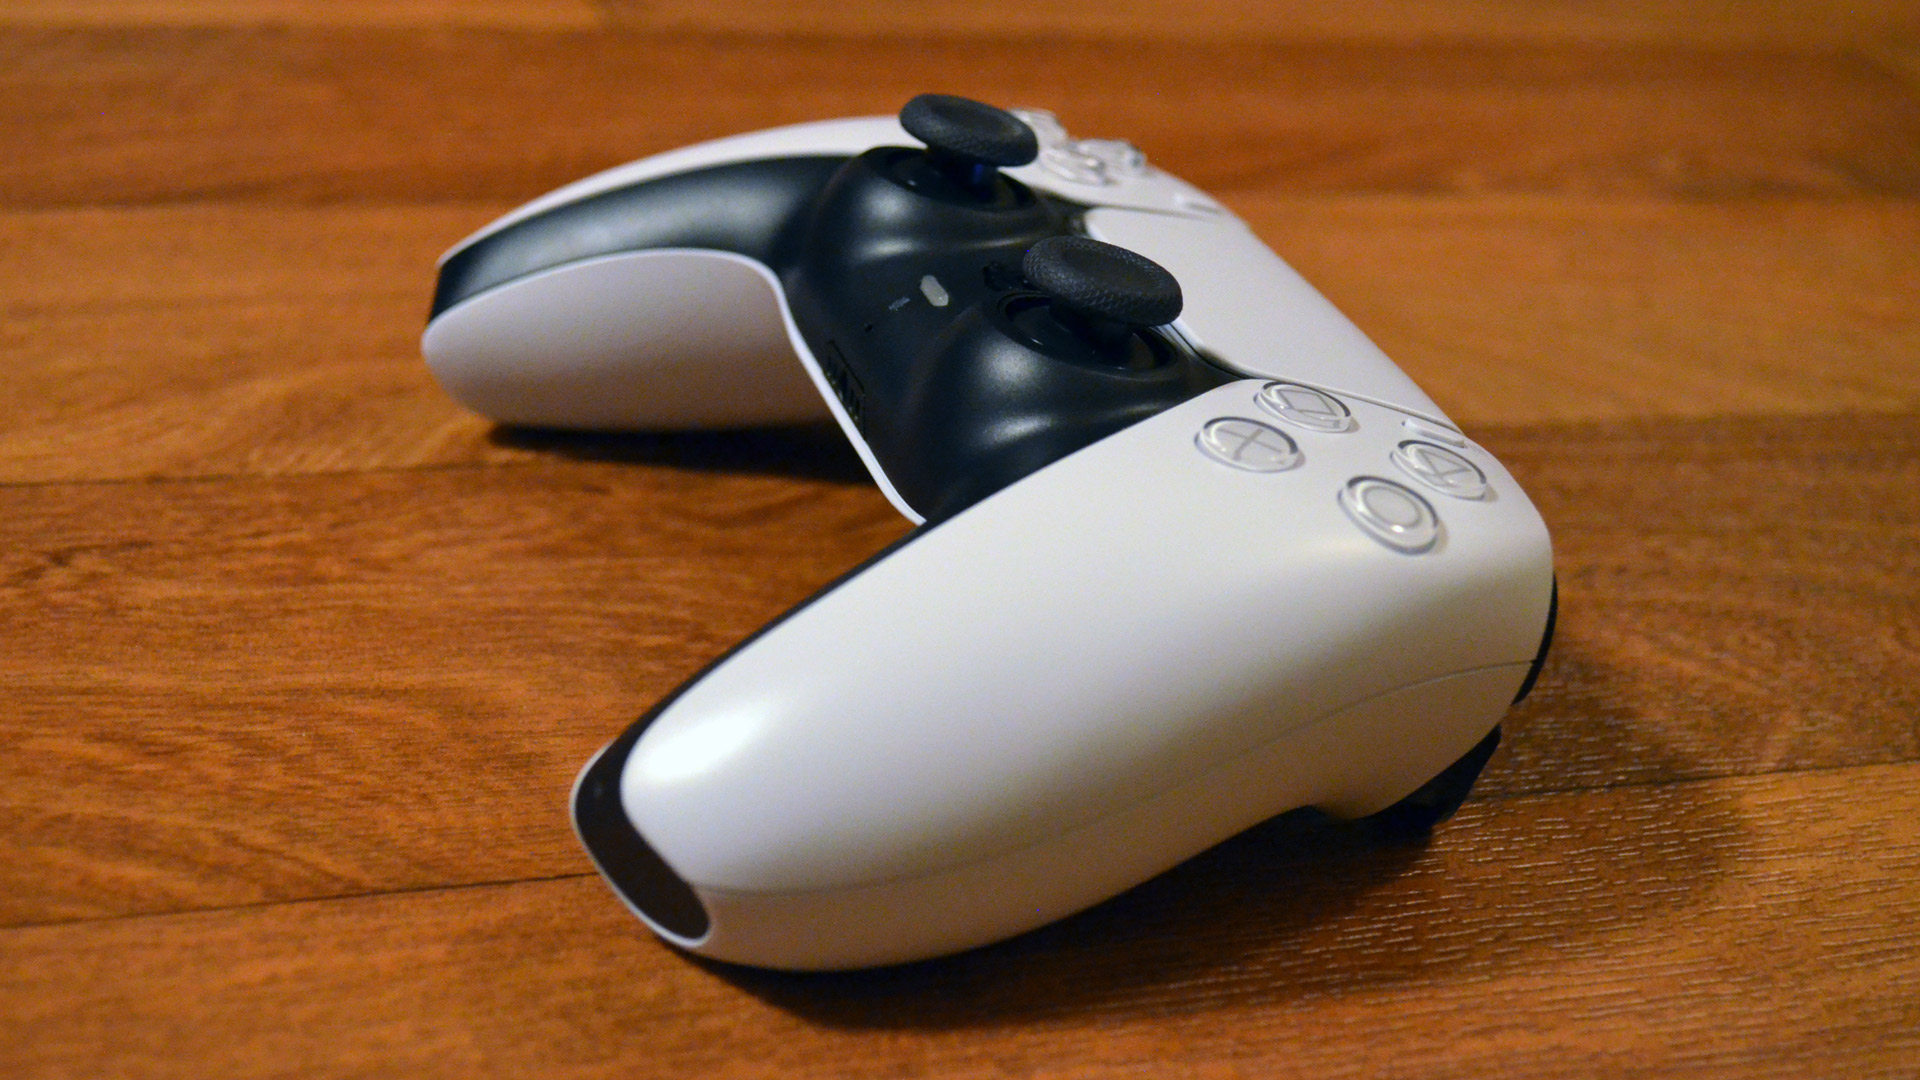 Xbox Fusion Pro 2 Review: A Controller With Compromises